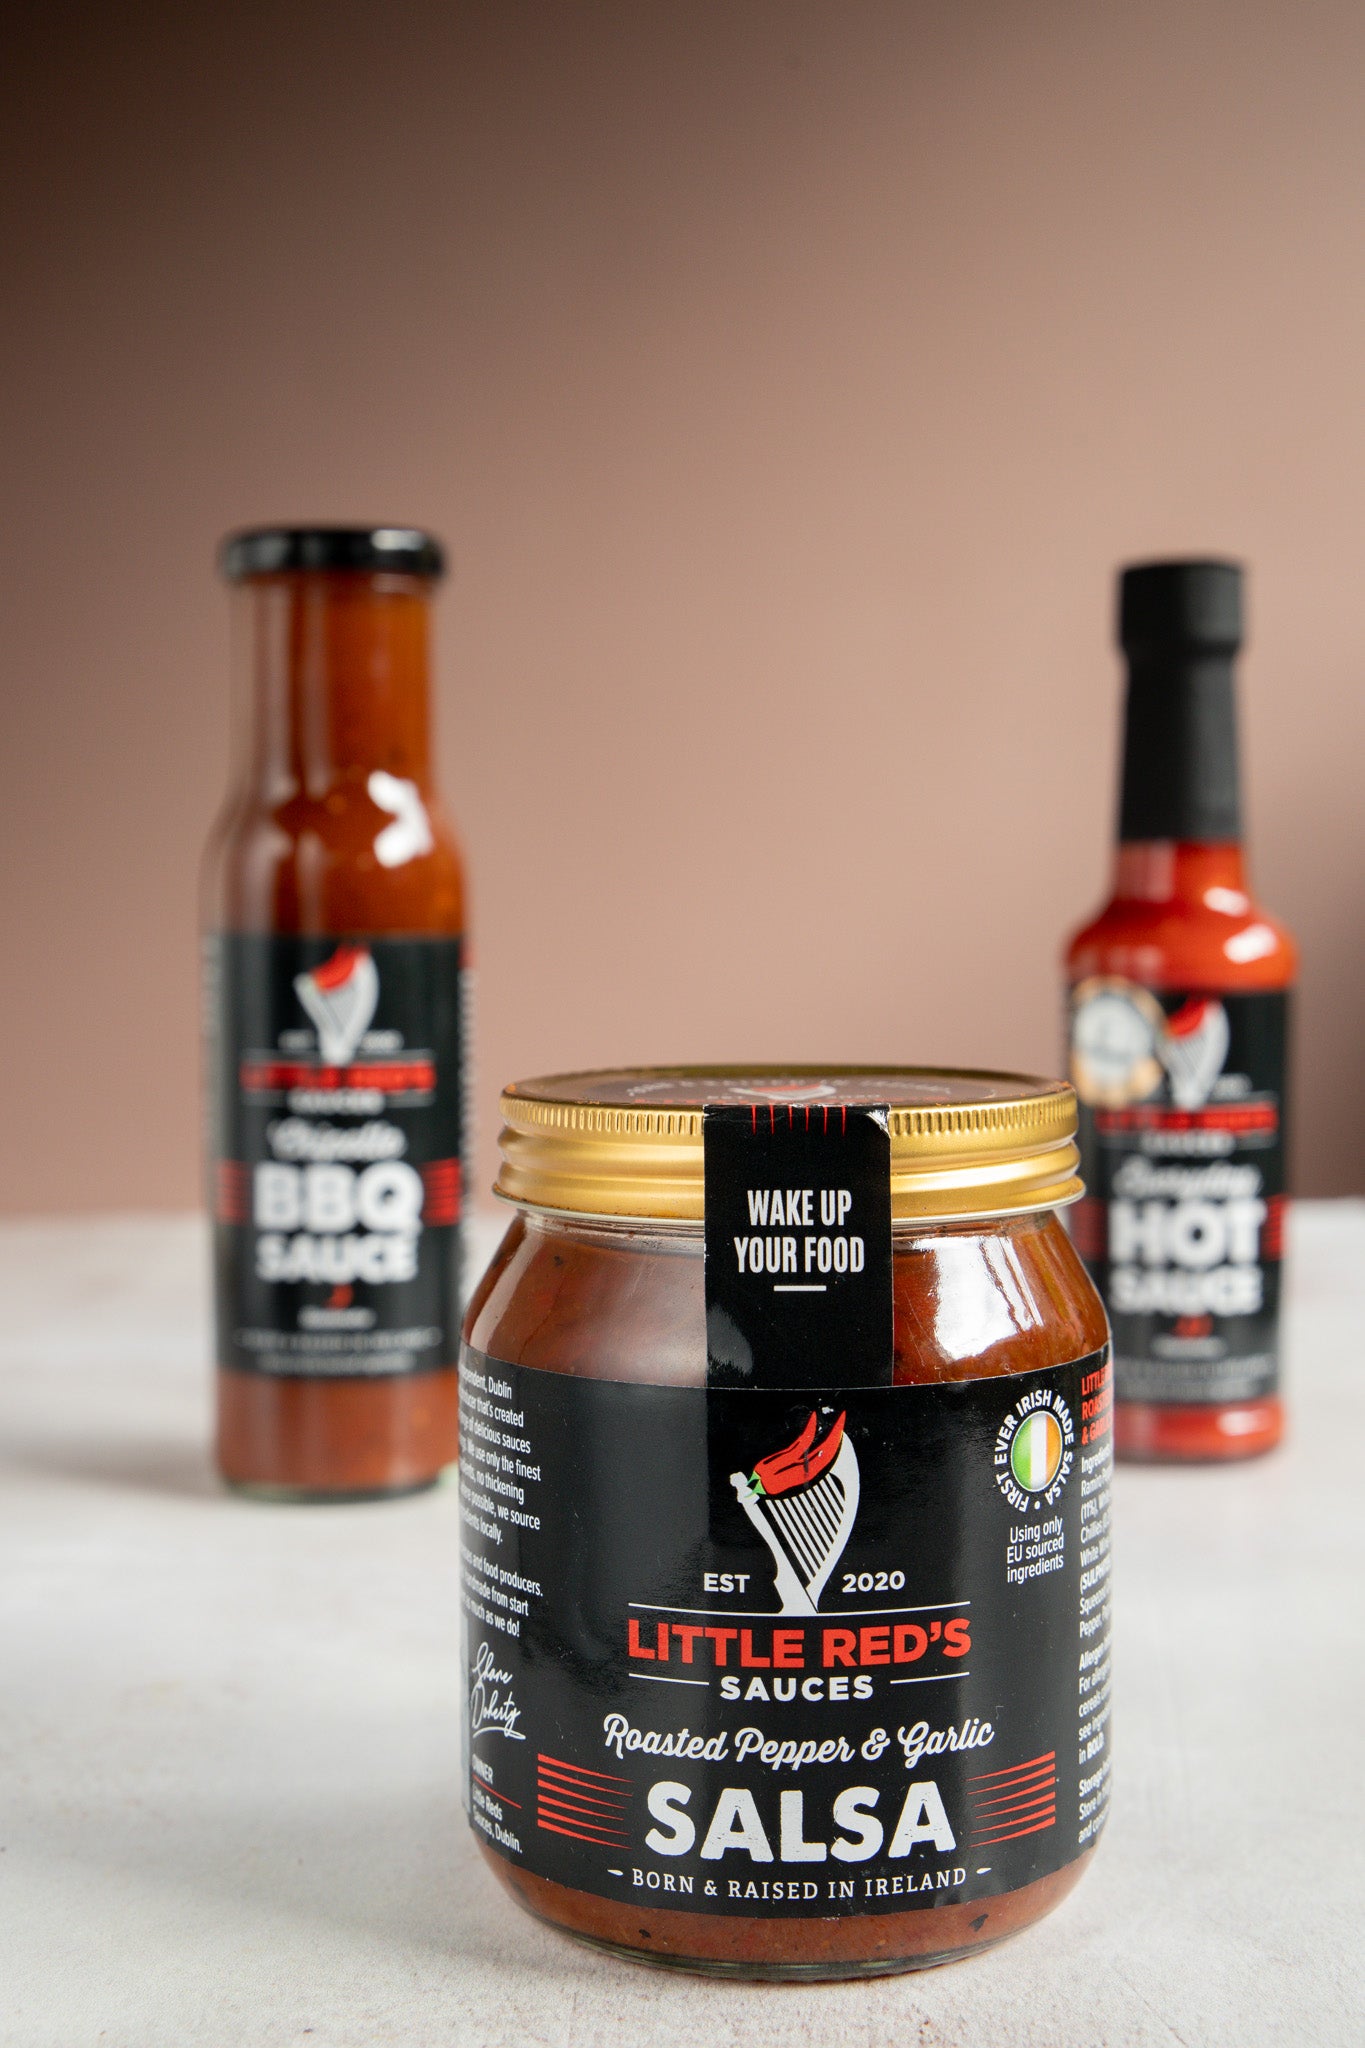 Focused close-up of Little Red's Gluten-Free Slow Roasted Pepper & Garlic Salsa, with other sauces softly blurred in the background. The salsa's label is prominent, showcasing its key features of slow-roasted peppers and garlic, underlining its gluten-free attribute, and appealing to health-conscious and flavor-seeking consumers